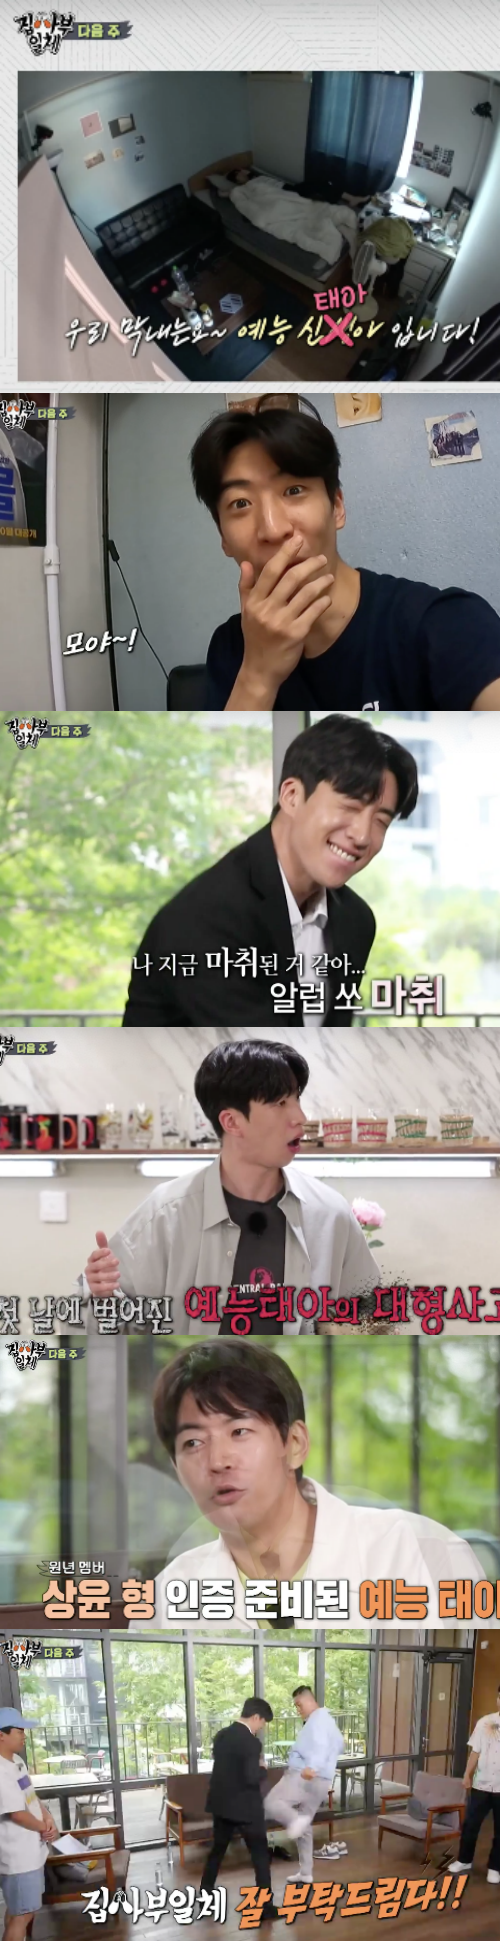 In All The Butlers, Lee Seung-gi also acknowledged that this Kwangsoo-like Yoo-bin announced his departure as the new youngest, and from the first appearance, he predicted a large sarrar.A special summer vacation was broadcast on SBS entertainment All The Butlers on the 4th.I started training to send the vacation safely this summer. First, after the personal training, I explained how to get a safety training to save my opponent and to confront Algae.When the members said that Algae could be dangerous without waves, the members decided to feel Algae directly and were surprised to see Algae shaking like crazy.Then, from Kim Dong-Hyun, Lee Seung-gi jumped directly into the water.Lee Seung-gi could go farther than Kim Dong-Hyun but was blocked by Algae.In the end, they declared their abandonment, shouting, It is not easy, retreat, and Park Gun quickly got it, shouting Icemaker discovery, and went forward without hesitation, showing off his ability to swim from the privileged.Park Gun, who read Algaes direction, made a way in the opposite direction of Baro, and Lee Seung-gi admired it as a privileged warrior.Park Gun did not face Baro and crossed the road diagonally, but eventually gave up in front of the nose in a huge Algae.The reason was that Algae was so strong in the water that he did not go forward, and Lee Seung-gi, who sympathized with it, sat down, saying, I did not know Algae was so scary, even dizzy.The Korea Coast Guard demonstrated the rescue swimming by explaining that it should save others in this extreme Algae.The members were impressed by the sudden rescue of the drowned, saying, It is wonderful, it is creepy, it is wonderful. It was only 52 seconds.Now the members are the Top Model, and in the event of a drowning accident, the Golden Time is only four minutes, so they have to approach the rescuer within one minute and get out of the water within two minutes.Lee Seung-gi and Yang Se-hyeong, Park Gun and Kim Dong-Hyun teamed up and started training to see if they could rescue them within Golden Time.From Park Gun, it was Top Model, perfecting with the rescue swimming manual and successfully rescued in just 1 minute 37 seconds.However, Lee Seung-gi was unable to move forward because the life tube was twisted in his arm, and eventually he missed the golden time because he was untangled.It was later rescued with the help of the Korea Coast Guard.All of them were exhausted from their hardship training. But they were not finished.Next, we decided to start search and rescue training at the trained Ship simulator that reproduced the inside of Ship.Once a passenger ship crash, it will be a major accident, and an accident will require the necessary Earth 2 knowledge to come without any trouble, said the Korea Coast Guard.If you get water up to your neck, you have to escape from the completely locked situation, you have to set the escape method and standard, he said. If you see light, you can escape in that direction, if you are in a hurry, you can turn to the same place, he said.Yang Se-hyeong and Park Gun entered Ship first.Yang Se-hyeong said, It is scary to come to a closed space in an oppressive space, and Park Gun was nervous that he could not breathe even if he was still.It was a narrower ship than I thought.In the meantime, the simulator descended at a rapid rate and was completely flooded.Lee Seung-gi said, How scary is in there? Unlike the tense and bright training ground, it is actually a blackout situation with both inside and outside.Park Gun succeeded in escaping first, but Yang Se-hyeong, who was nervous with the fear of closure, was embarrassed by The Net filled in front of his eyes, but succeeded in overcoming the fear and escaping.When you go inside, youre afraid of closing, youre scared of being trapped, Yang Se-hyeong said. Park Gun also agreed that fear is not a joke.Next up was Kim Dong-Hyun and Lee Seung-gi, the Top Model.To Kim Dong-Hyun, who panicked in Ship, the Korea Coast Guard began training by saying, Stay down, and the two men cleared up and Top Model.Kim Dong-Hyun first stopped at The Net, which kept blinding the view, and then nervously said, I suddenly feel afraid. Then, I will go to the lurking and succeeded in Earth 2 in the water to avoid obstacles.This is the fourth second secret, SBS, and Earth 2.I think this training will help us stay calm even if the crisis is in place, said the Korea Coast Guard, and in fact, its hard to find a large ship, and I hope you can check it because there are emergency evacuations all over the ship.The last gate remains for Earth 2, to learn how to do Earth 2 on a real boat, the final training to escape from a sleeper Ship.First the emergency set signal rang and informed the situation that the Ship had to leave.The Korea Coast Guard explained the life rafts: We need to check emergency guidance for a safe trip, the members said, once again alerted.The Korean Coast Guard continued that it should escape from the sinking Ship, saying, If you do not play on this ship, it is over, and if you have confidence that you can do it, you can succeed in Earth 2.With no training now in action, Park Gun was the first to take the lead; Park Gun, who was in a position of weakness, jumped from a dizzying height.The Silgen Book was also a brilliant steel privileger, Park Gun. Next, Lee Seung-gi, a former privileged fighter, succeeded in jumping down to the pilot assistant.This moved the privileged duo Park Gun and Lee Seung-gi to Baro up the flipped raft - but its not easy as they lose their balance.Again, shouting the fight, the two re-Top Models, and finally succeeded in setting up a raft boat.Kim Dong-Hyun and Yang Se-hyeong also managed to escape the sinking Ship, now having to take a boat out of the Ship.While Lee Seung-gi and Park Gun assembled the paddock, Kim Dong-Hyun and Yang Se-hyeong fired a signal from the sleeper Ship to signal the distress location.Thanks to this, we all succeeded in securing a safe distance by joining forces.At the end of the broadcast, the members said, It is a really beneficial training. The members all ended the training by praying for a safe summer vacation for all the people.On the other hand, in the trailer, actor Yoo Soo-bin, who announced his departure as the new youngest, was introduced.In particular, Lee Seung-gi looked at Yoo Soo-bin, similar to the appearance of Kwangsoo, and said, I will go out of Kwangsoo type Running Man and say All The Butlers. In the expectation of everyone, Yoo Soo-bin predicted a major accident from the first day.Capture All The Butlers Broadcast Screen